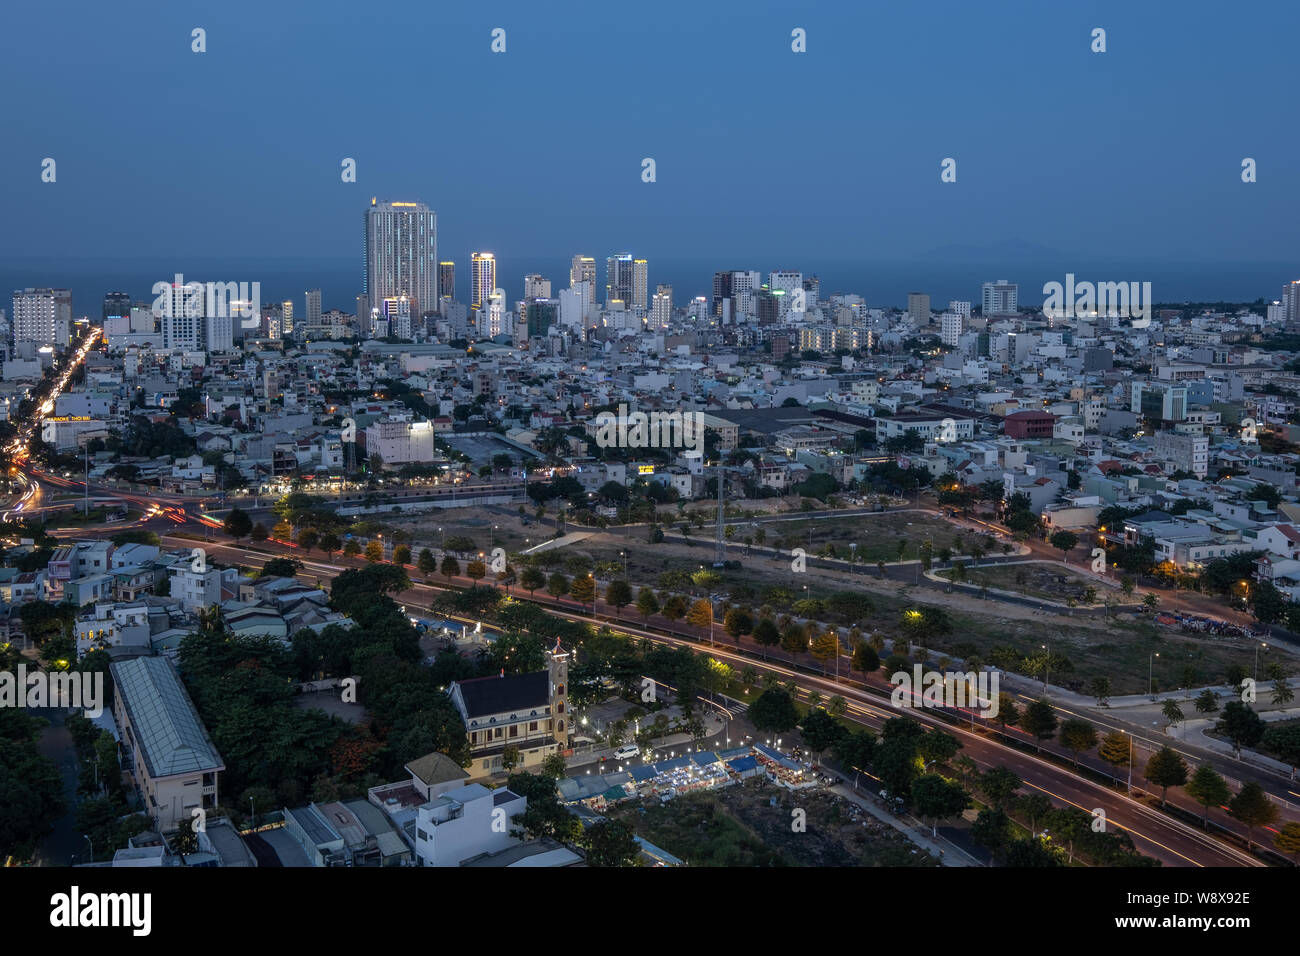 Overview of Danang city at dusk and night time, Vietnam Stock Photo